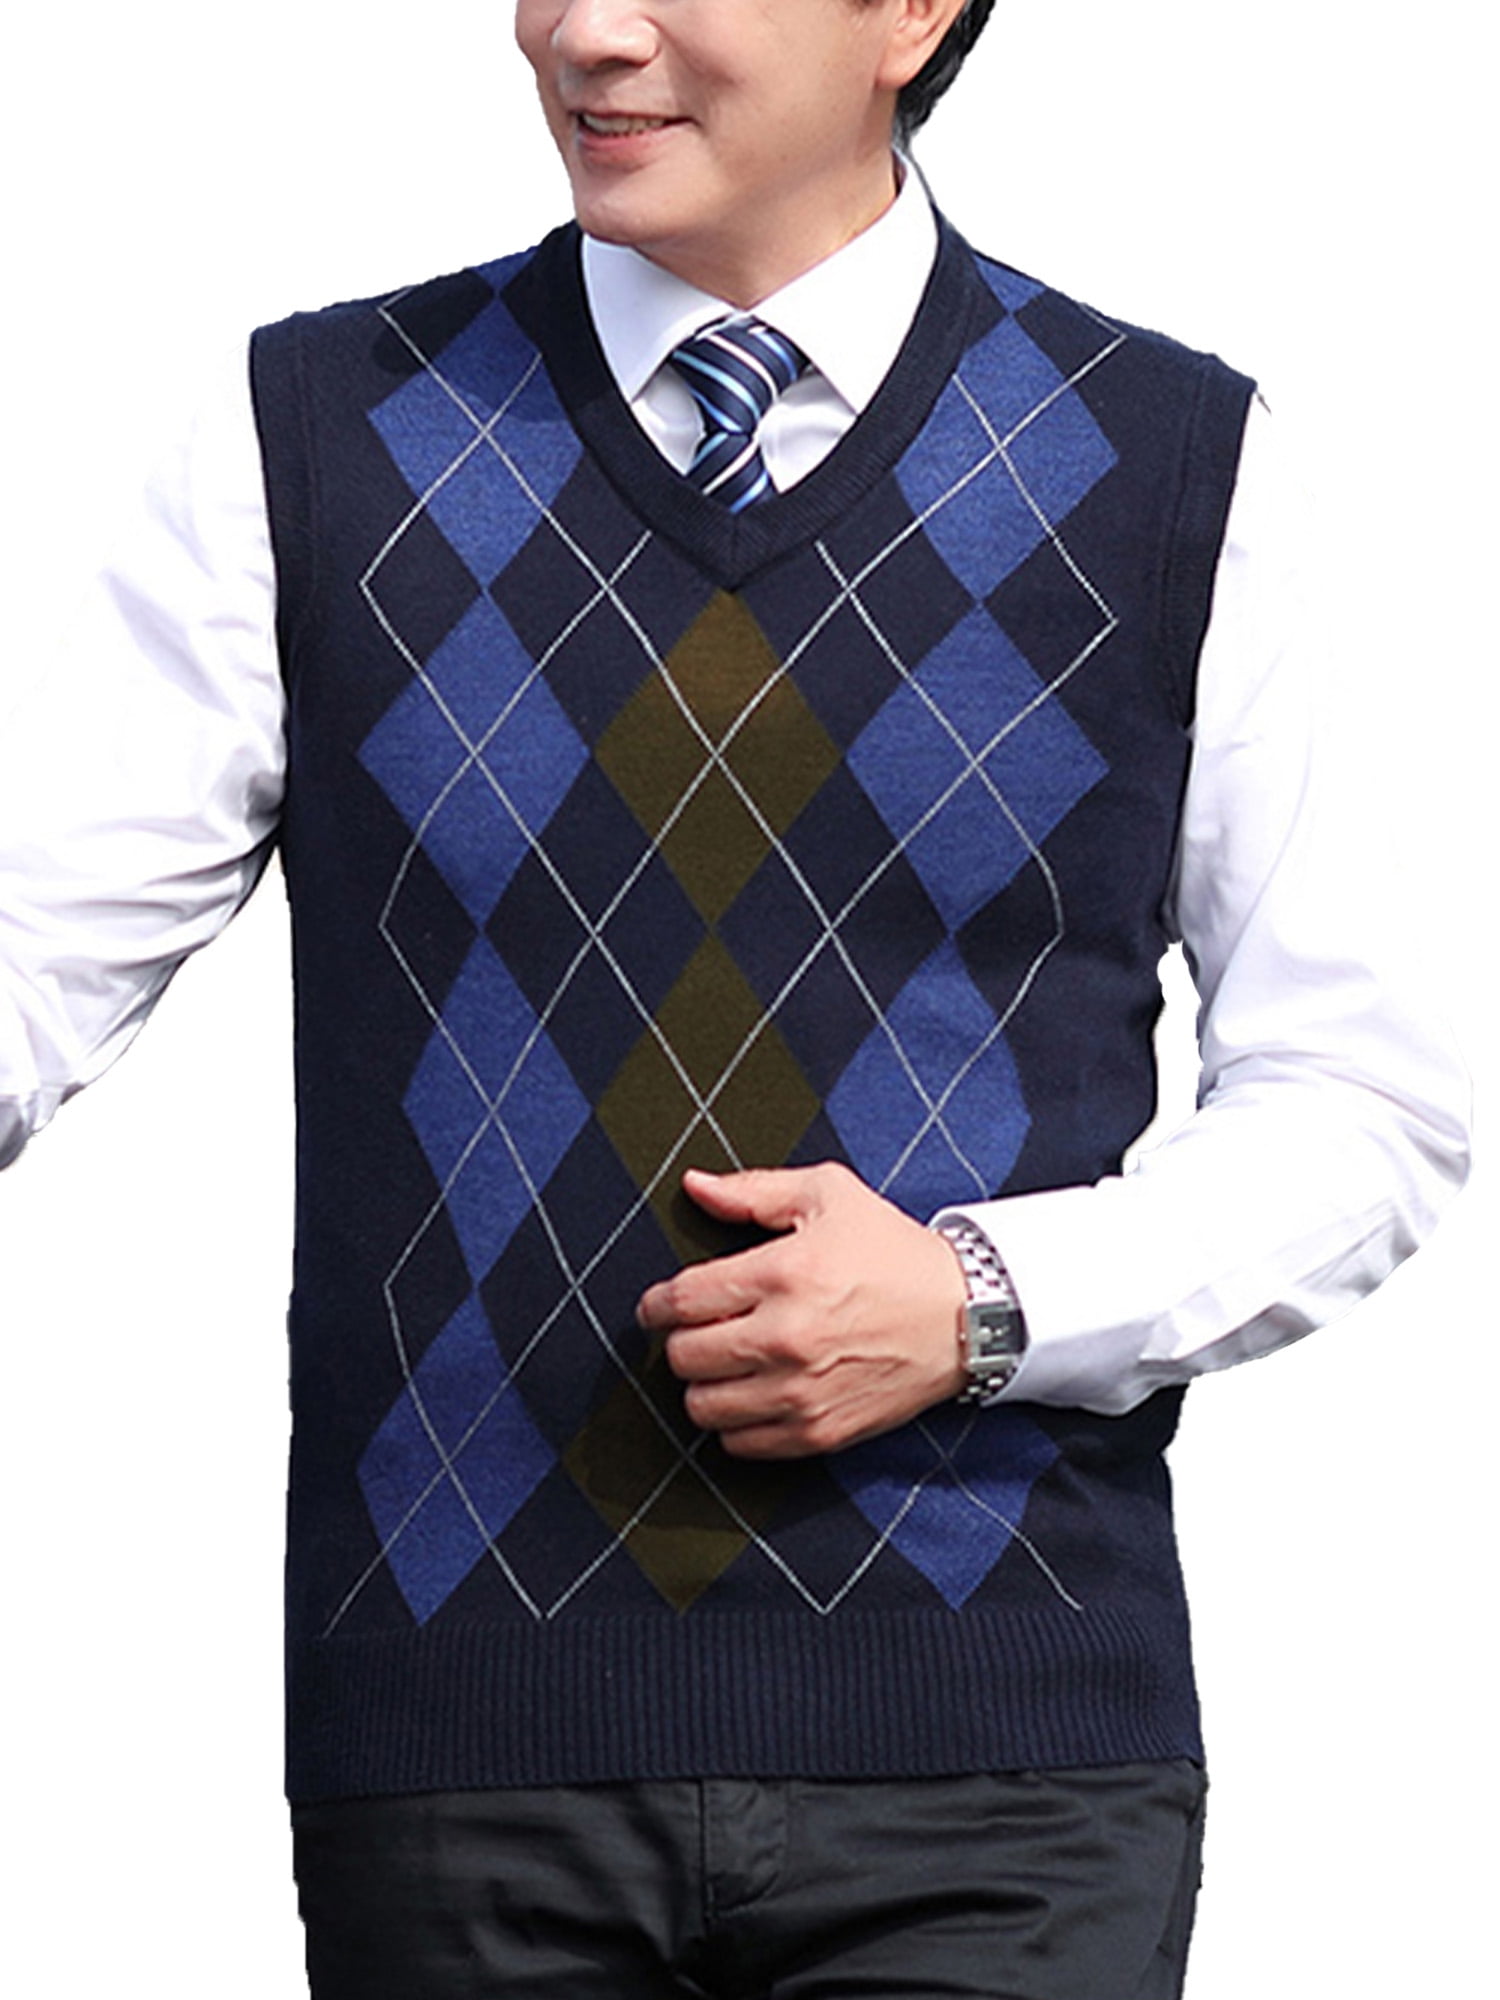 Men's Knitted Sweaters Vests Sleeveless Crewneck Sweatshirts Pullover Casual Slim Fit Argyle Knitwear Tops Comfy Tops 